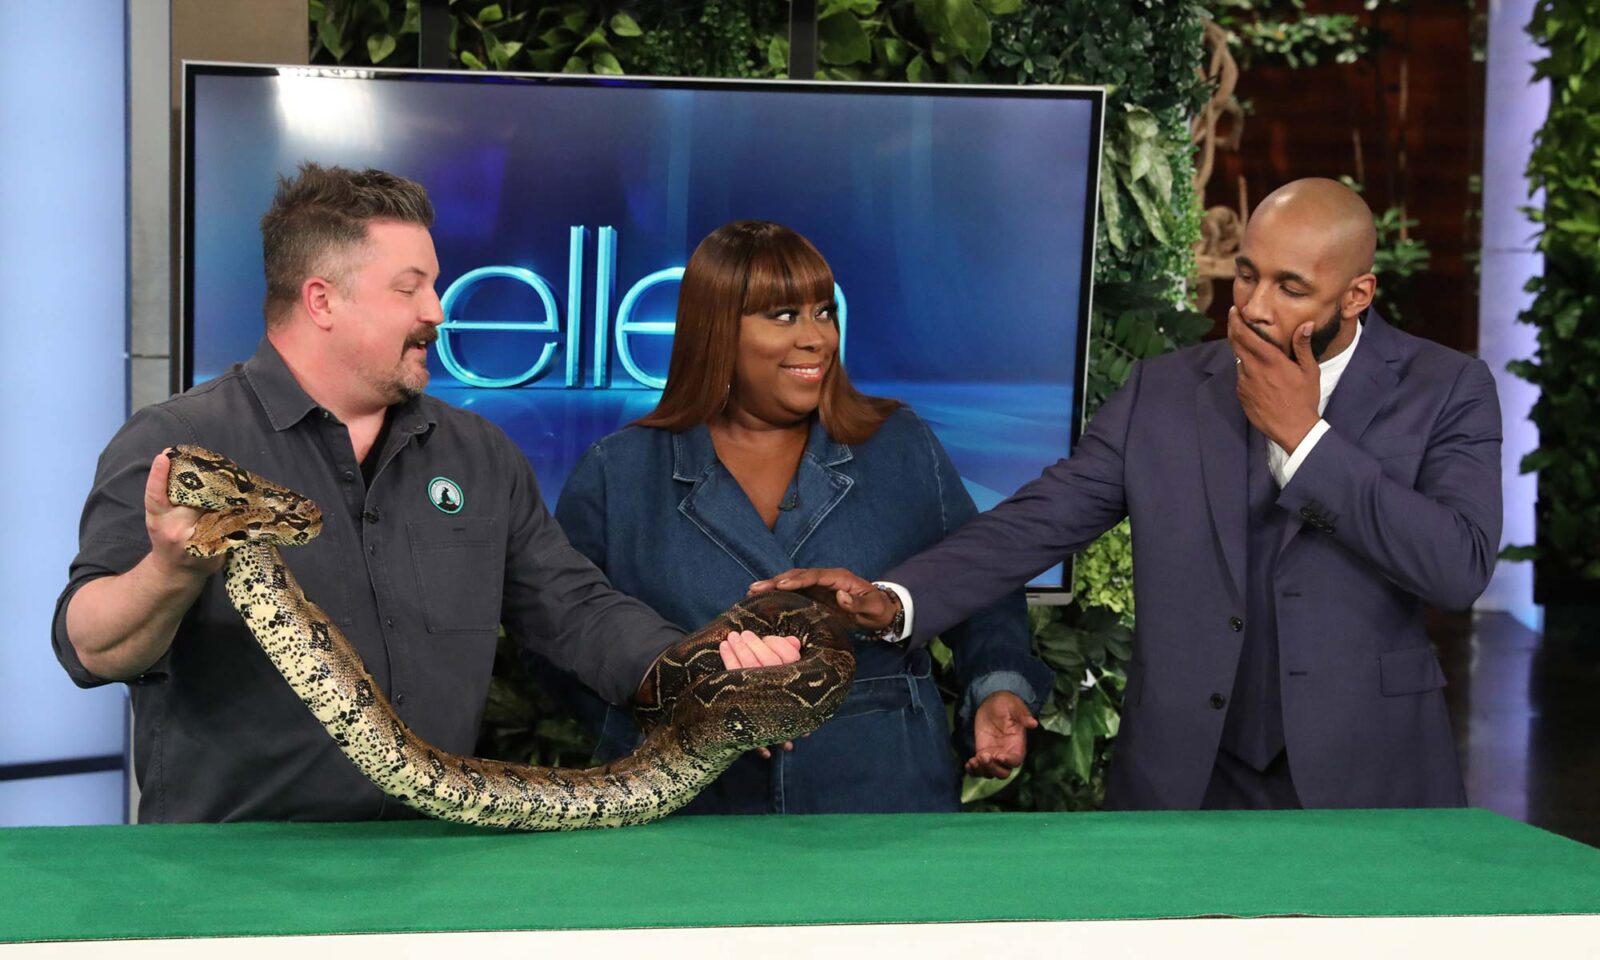 David Mizejewski holds a snake on the Ellen show. Loni Love looks on as Stephen "tWitch" Boss carefully touches the snake.